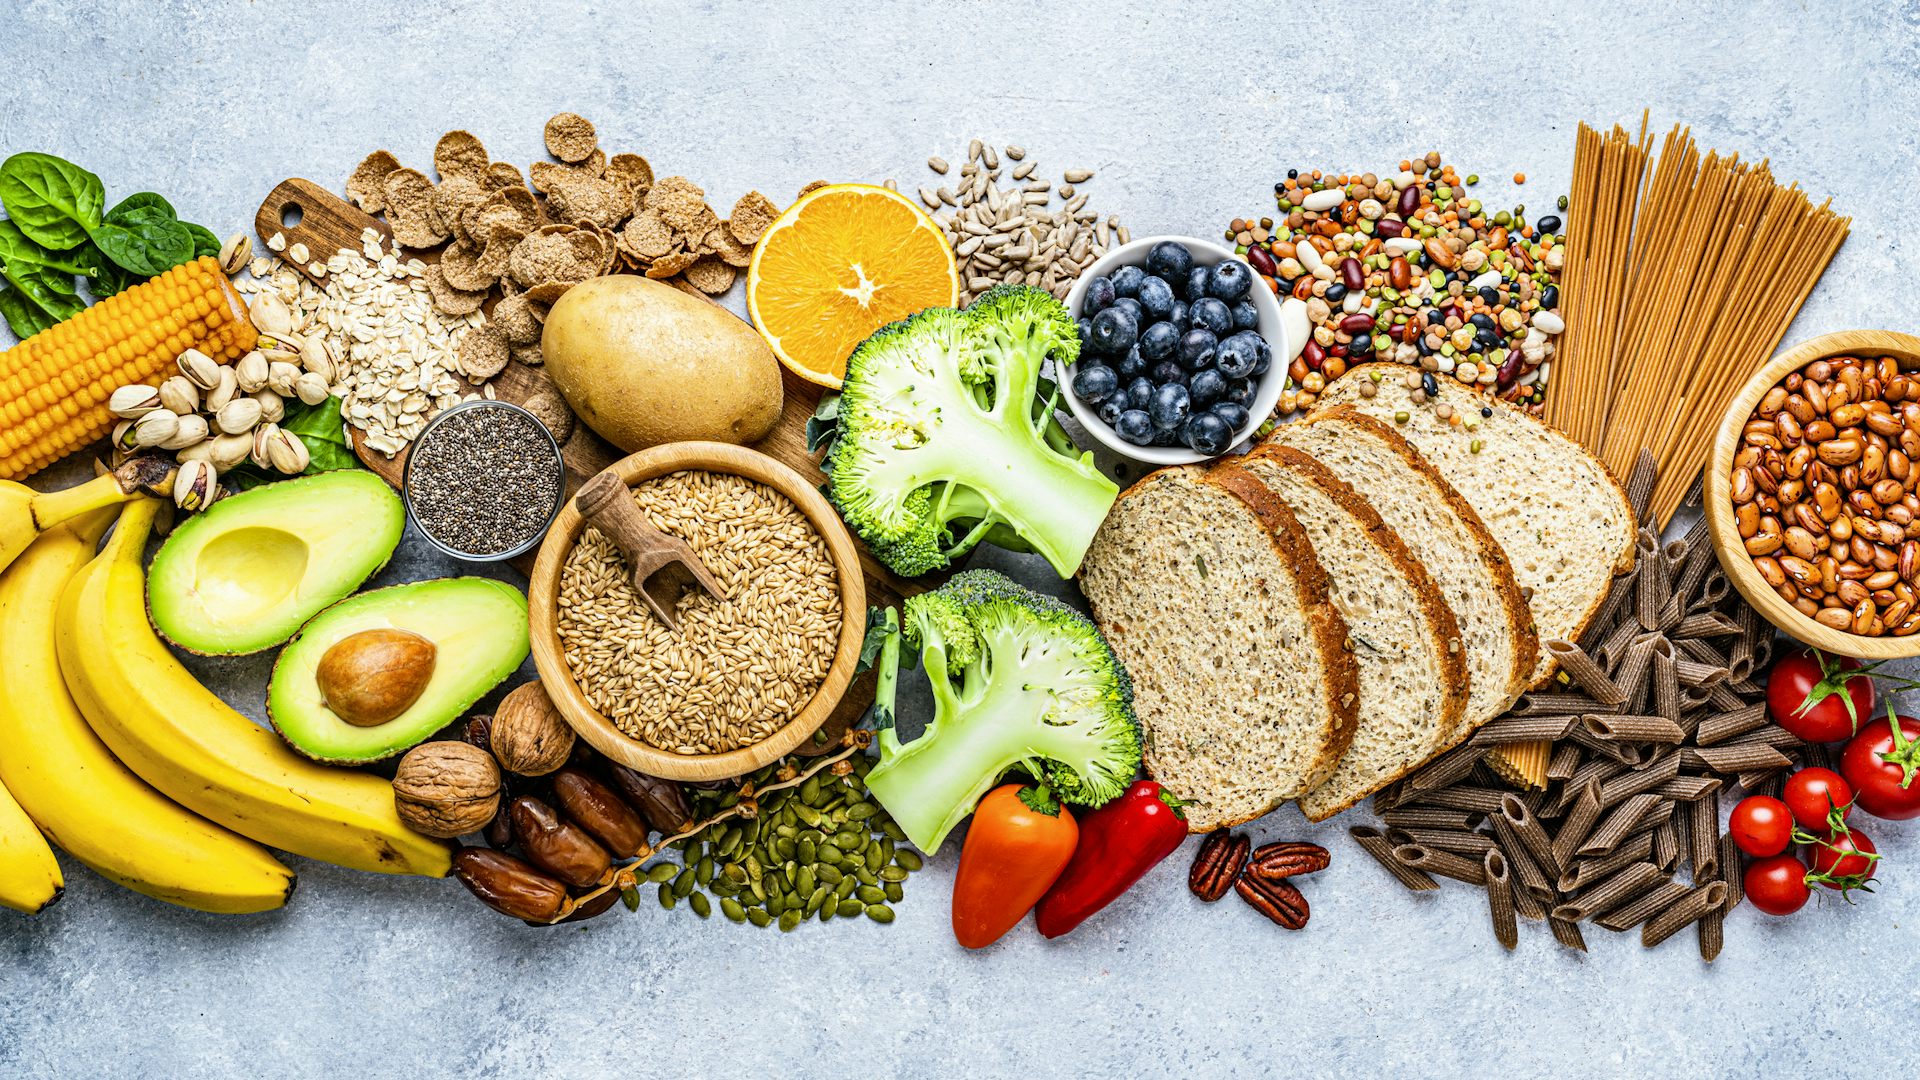 Overhead view of colorful foods with high dietary fiber content arranged side by side on a countertop.